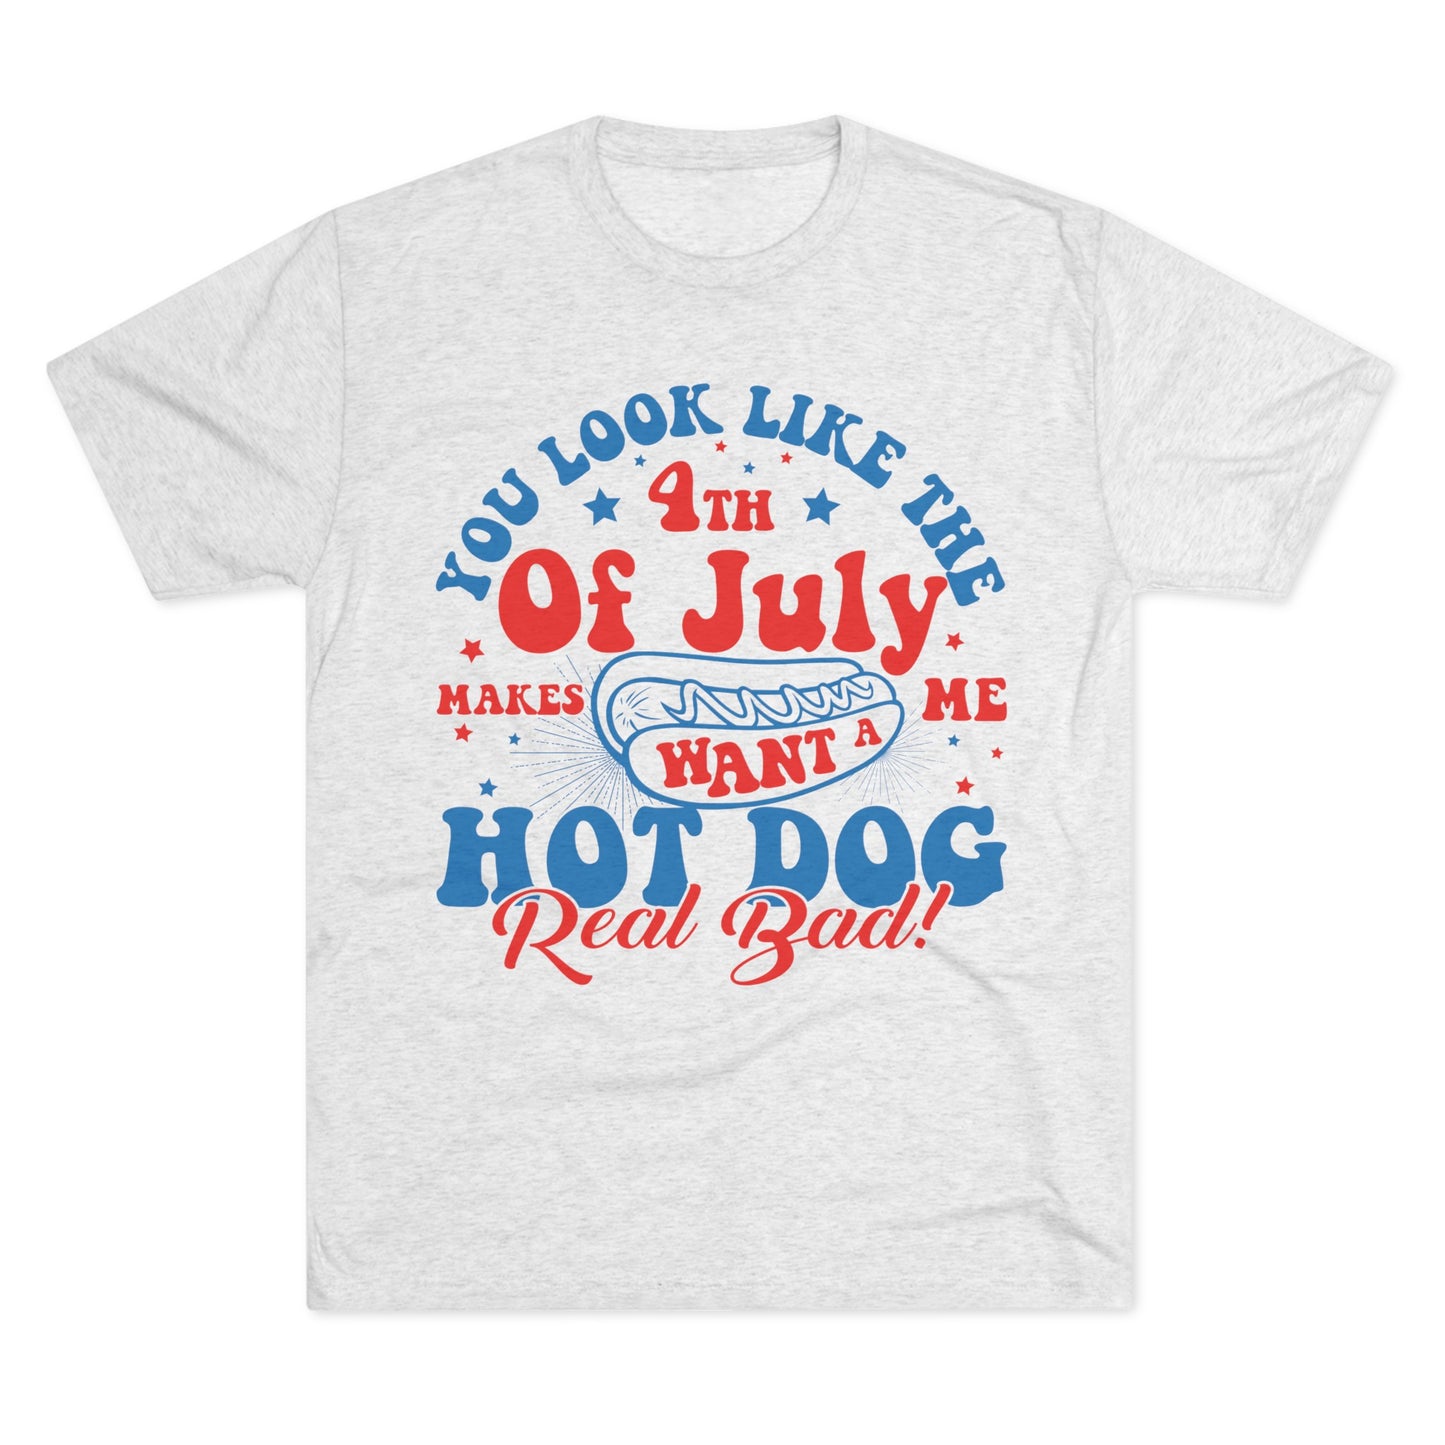 Get trendy with You Look Like the Fourth of July!  Tri-Blend Crew Tee - T-Shirt available at Good Gift Company. Grab yours for $21.88 today!